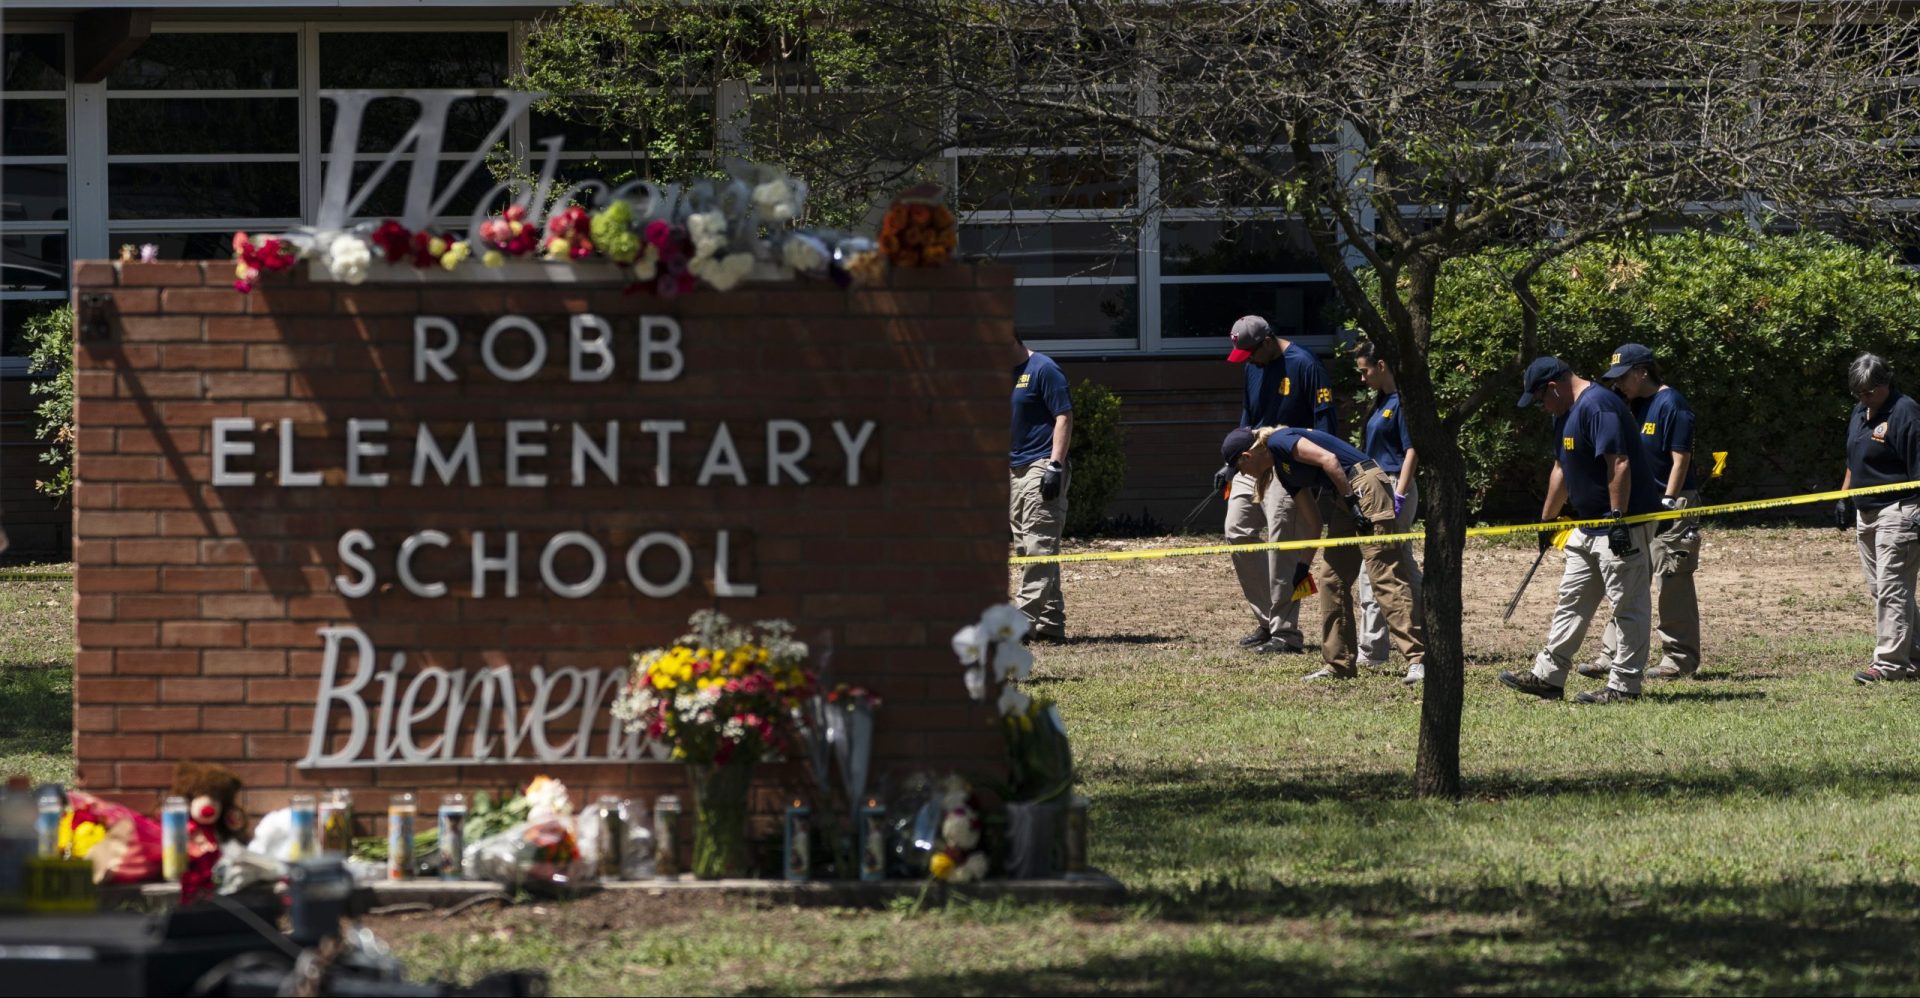 Investigators search for evidences outside Robb Elementary School in Uvalde, Texas, Wednesday, May 25, 2022. Desperation turned to heart-wrenching sorrow for families of grade schoolers killed after an 18-year-old gunman barricaded himself in their Texas classroom and began shooting, killing several fourth-graders and their teachers